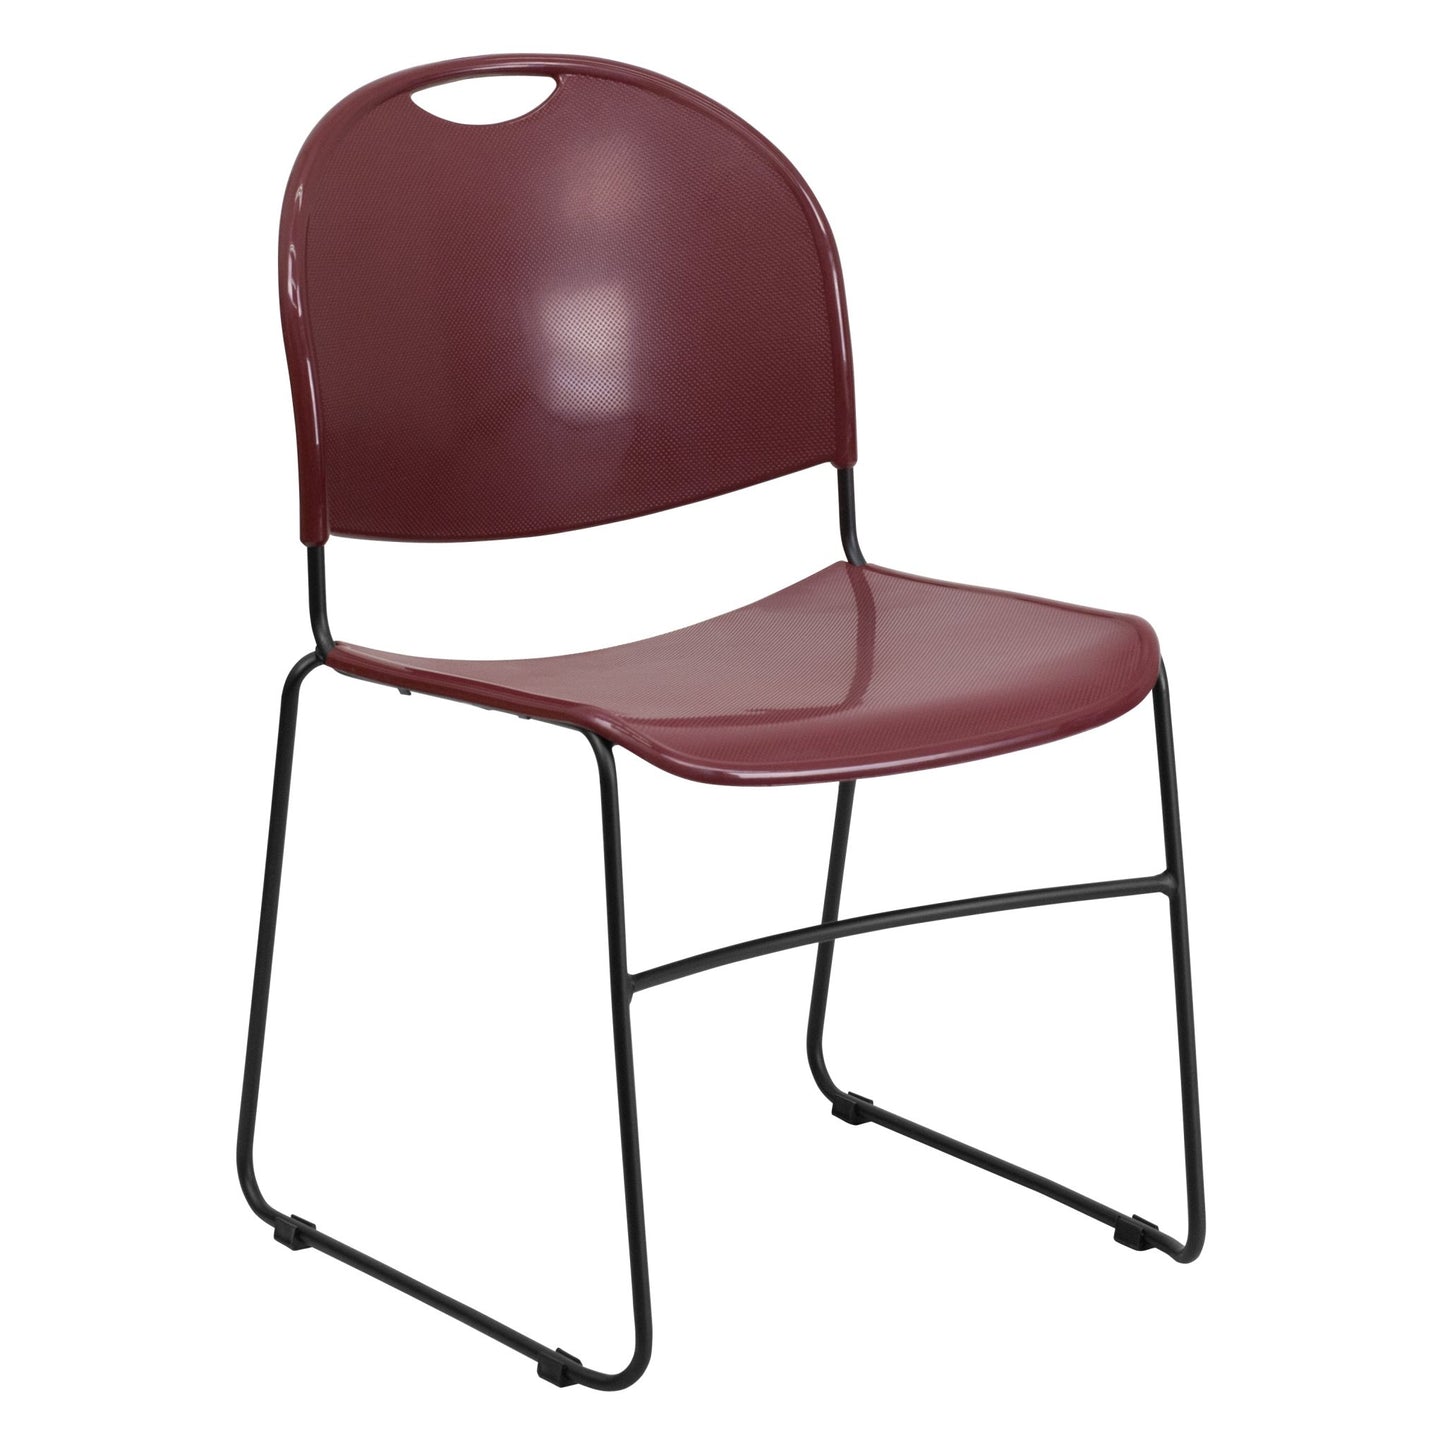 HERCULES Series 880 lb. Capacity Ultra-Compact Stack Chair with Frame - SchoolOutlet